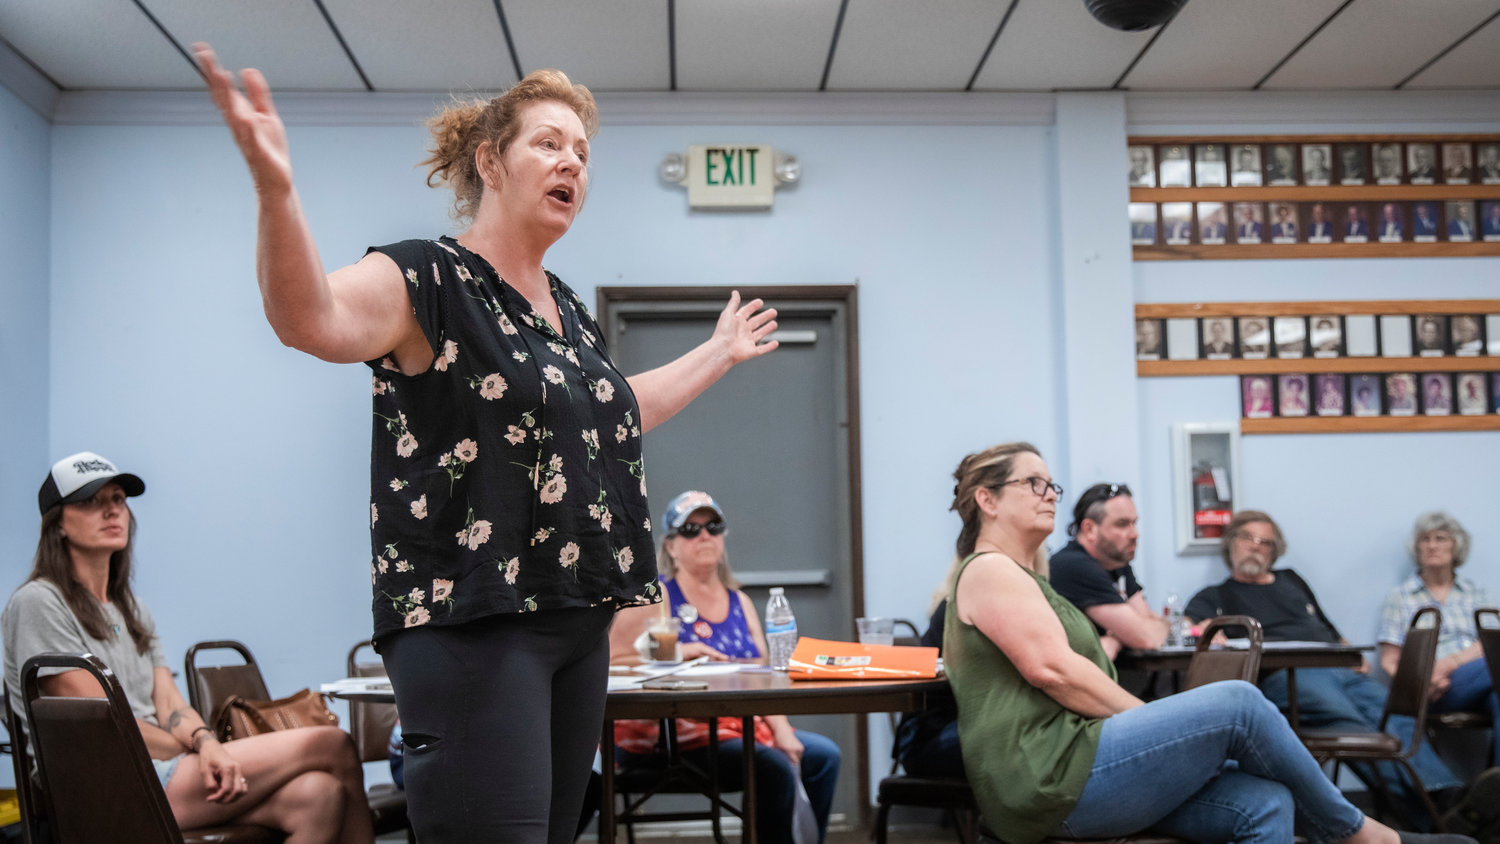 Carla Askew, Cinebar Precinct Committee Officer and Chair of the PCOs Training and Recruiting Committee demands accountability during a Lewis County Republicans meeting in Chehalis on Monday.